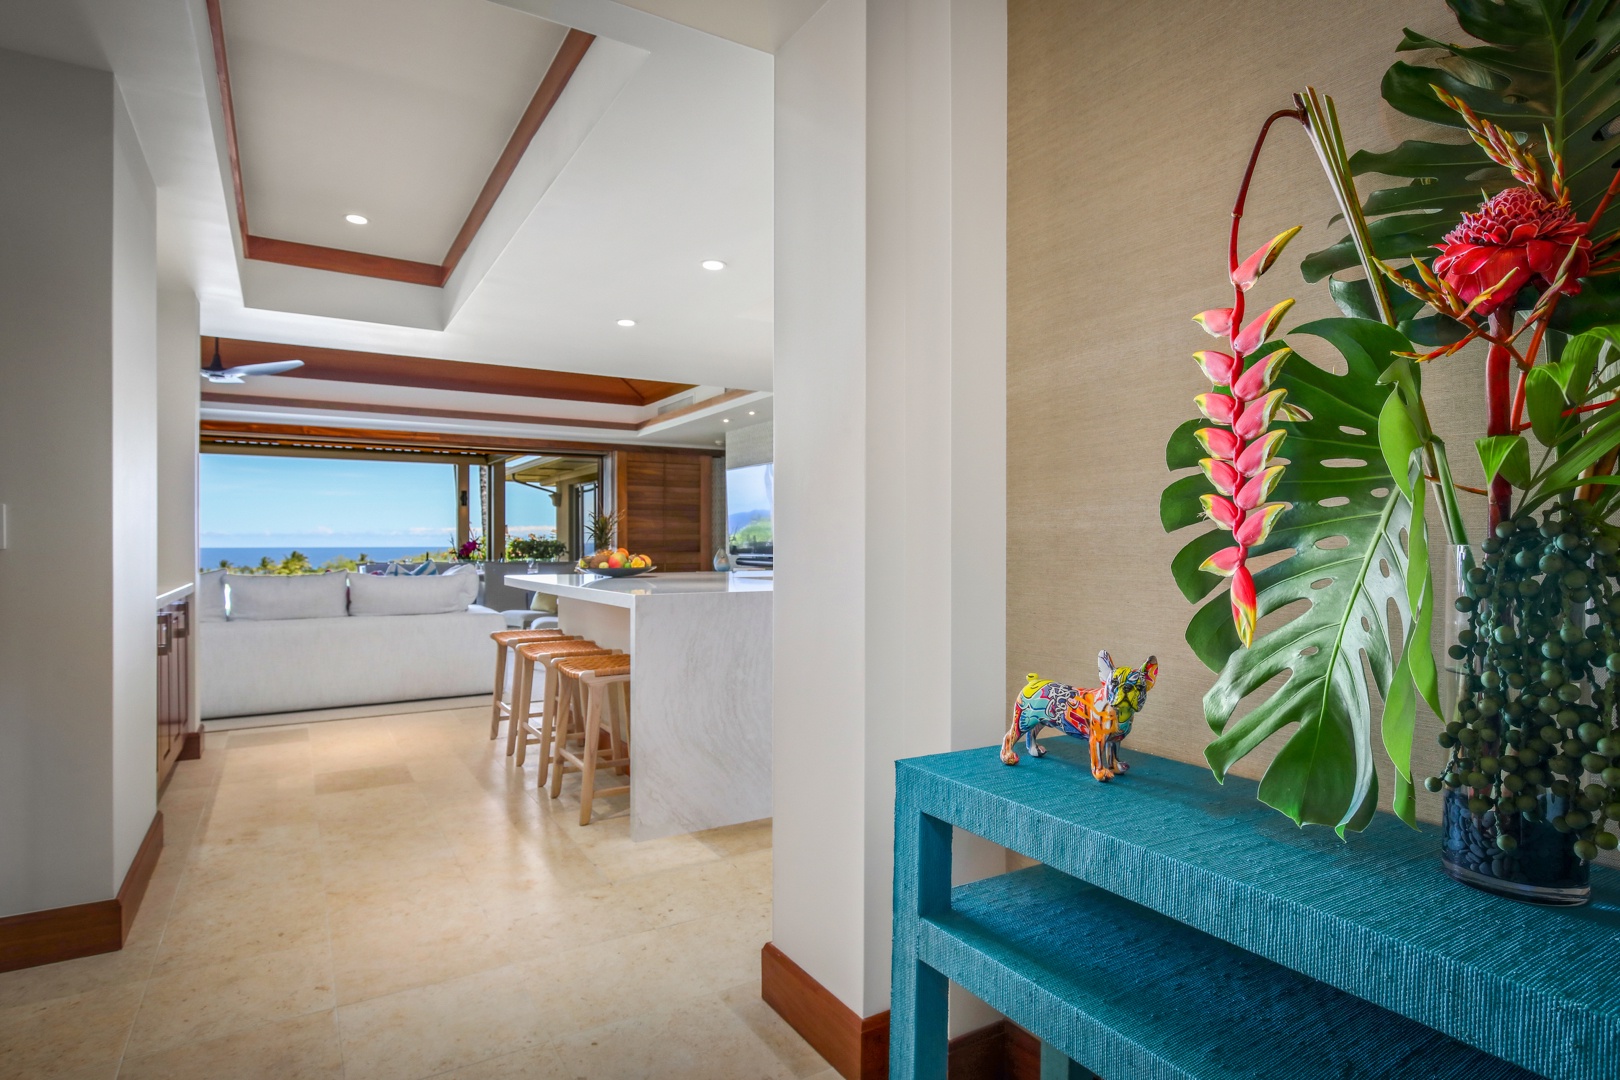 Kailua Kona Vacation Rentals, 4BD Hainoa Estate (122) at Four Seasons Resort at Hualalai - Artistic details in the foyer invite you into stunning architecture and award winning interior design.